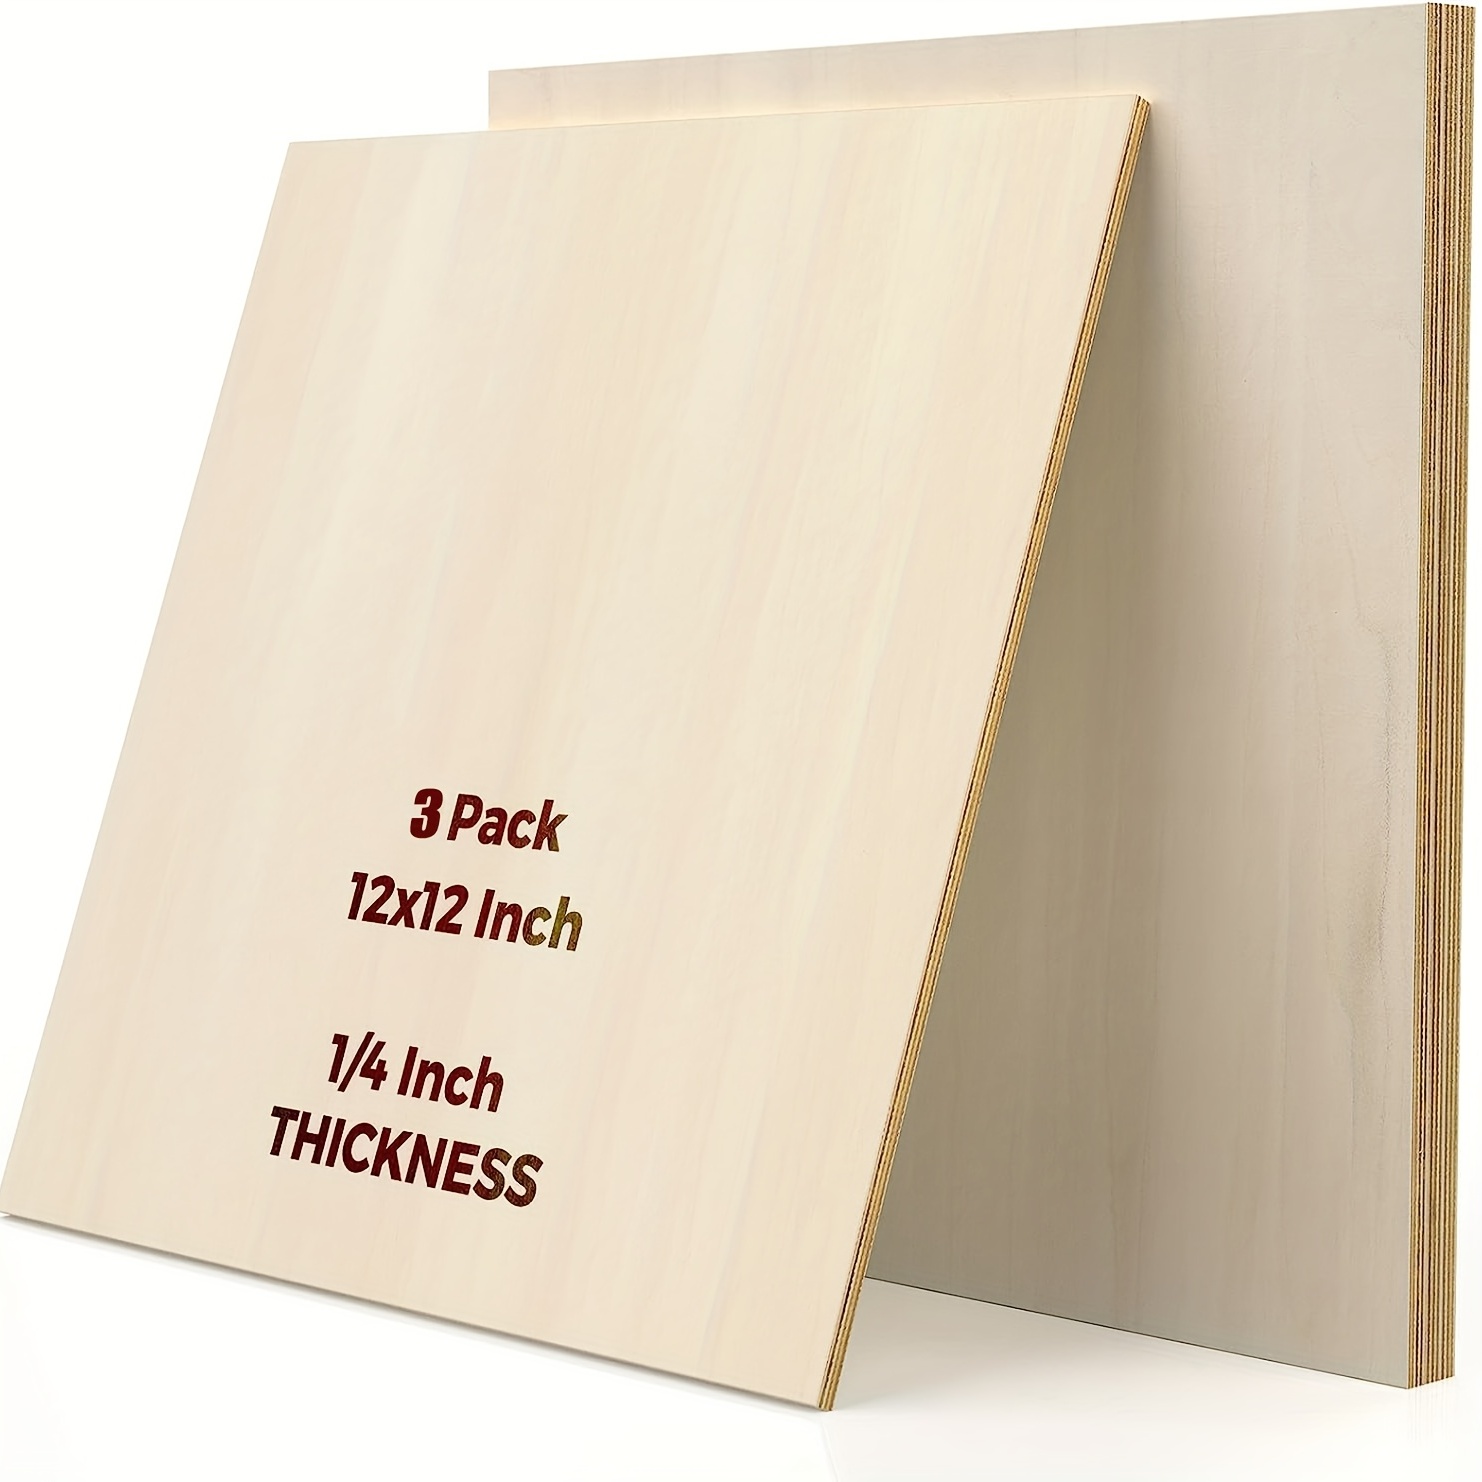 Wood Circles 12 inch, 1/4 Inch Thick, Birch Plywood Discs, Pack of